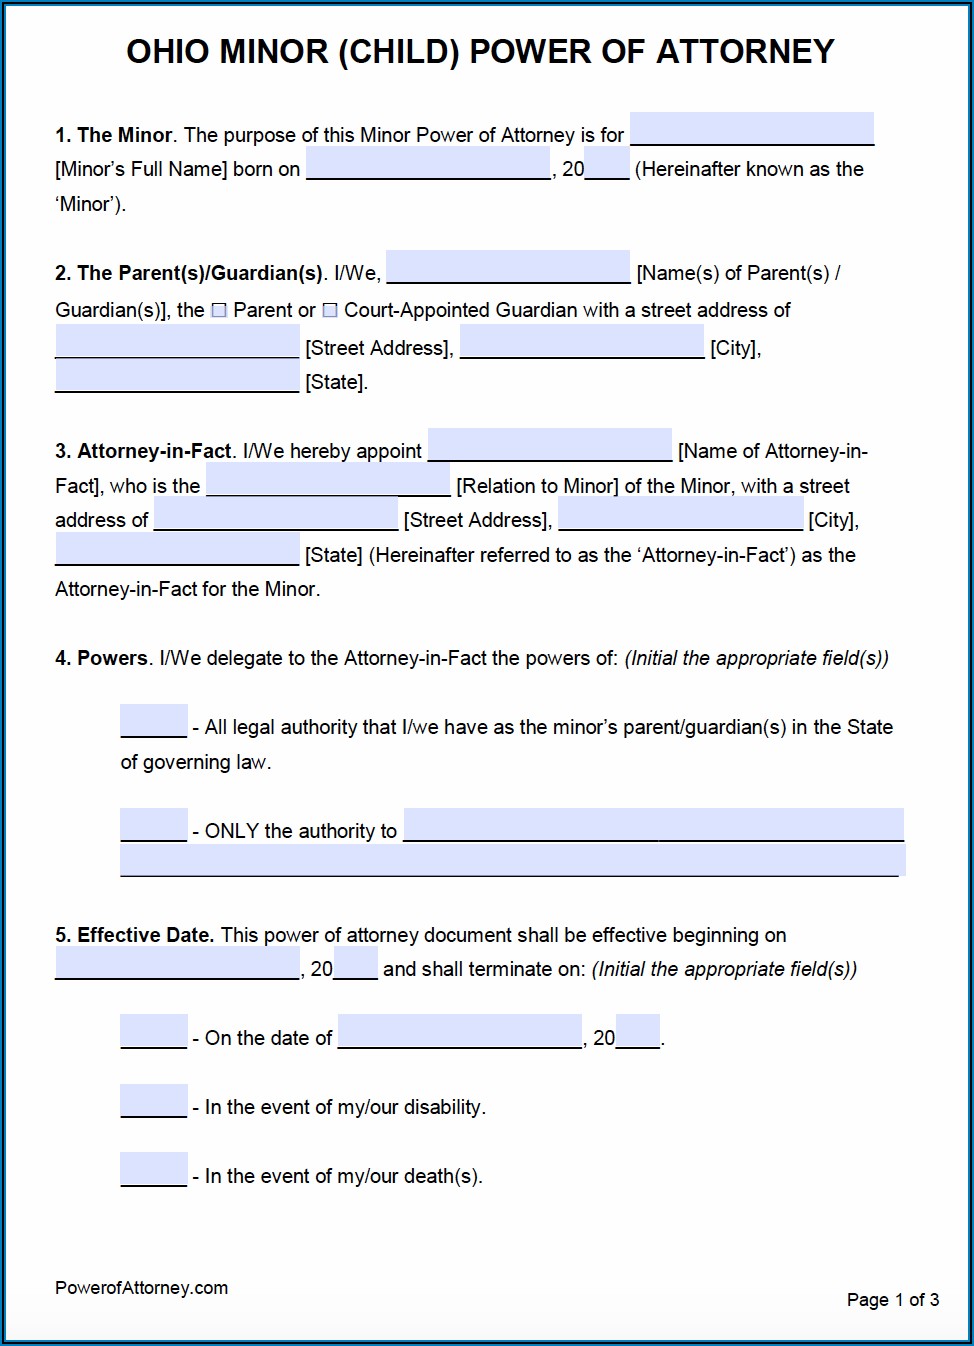 Ohio State Bar Association Financial Power Of Attorney Form